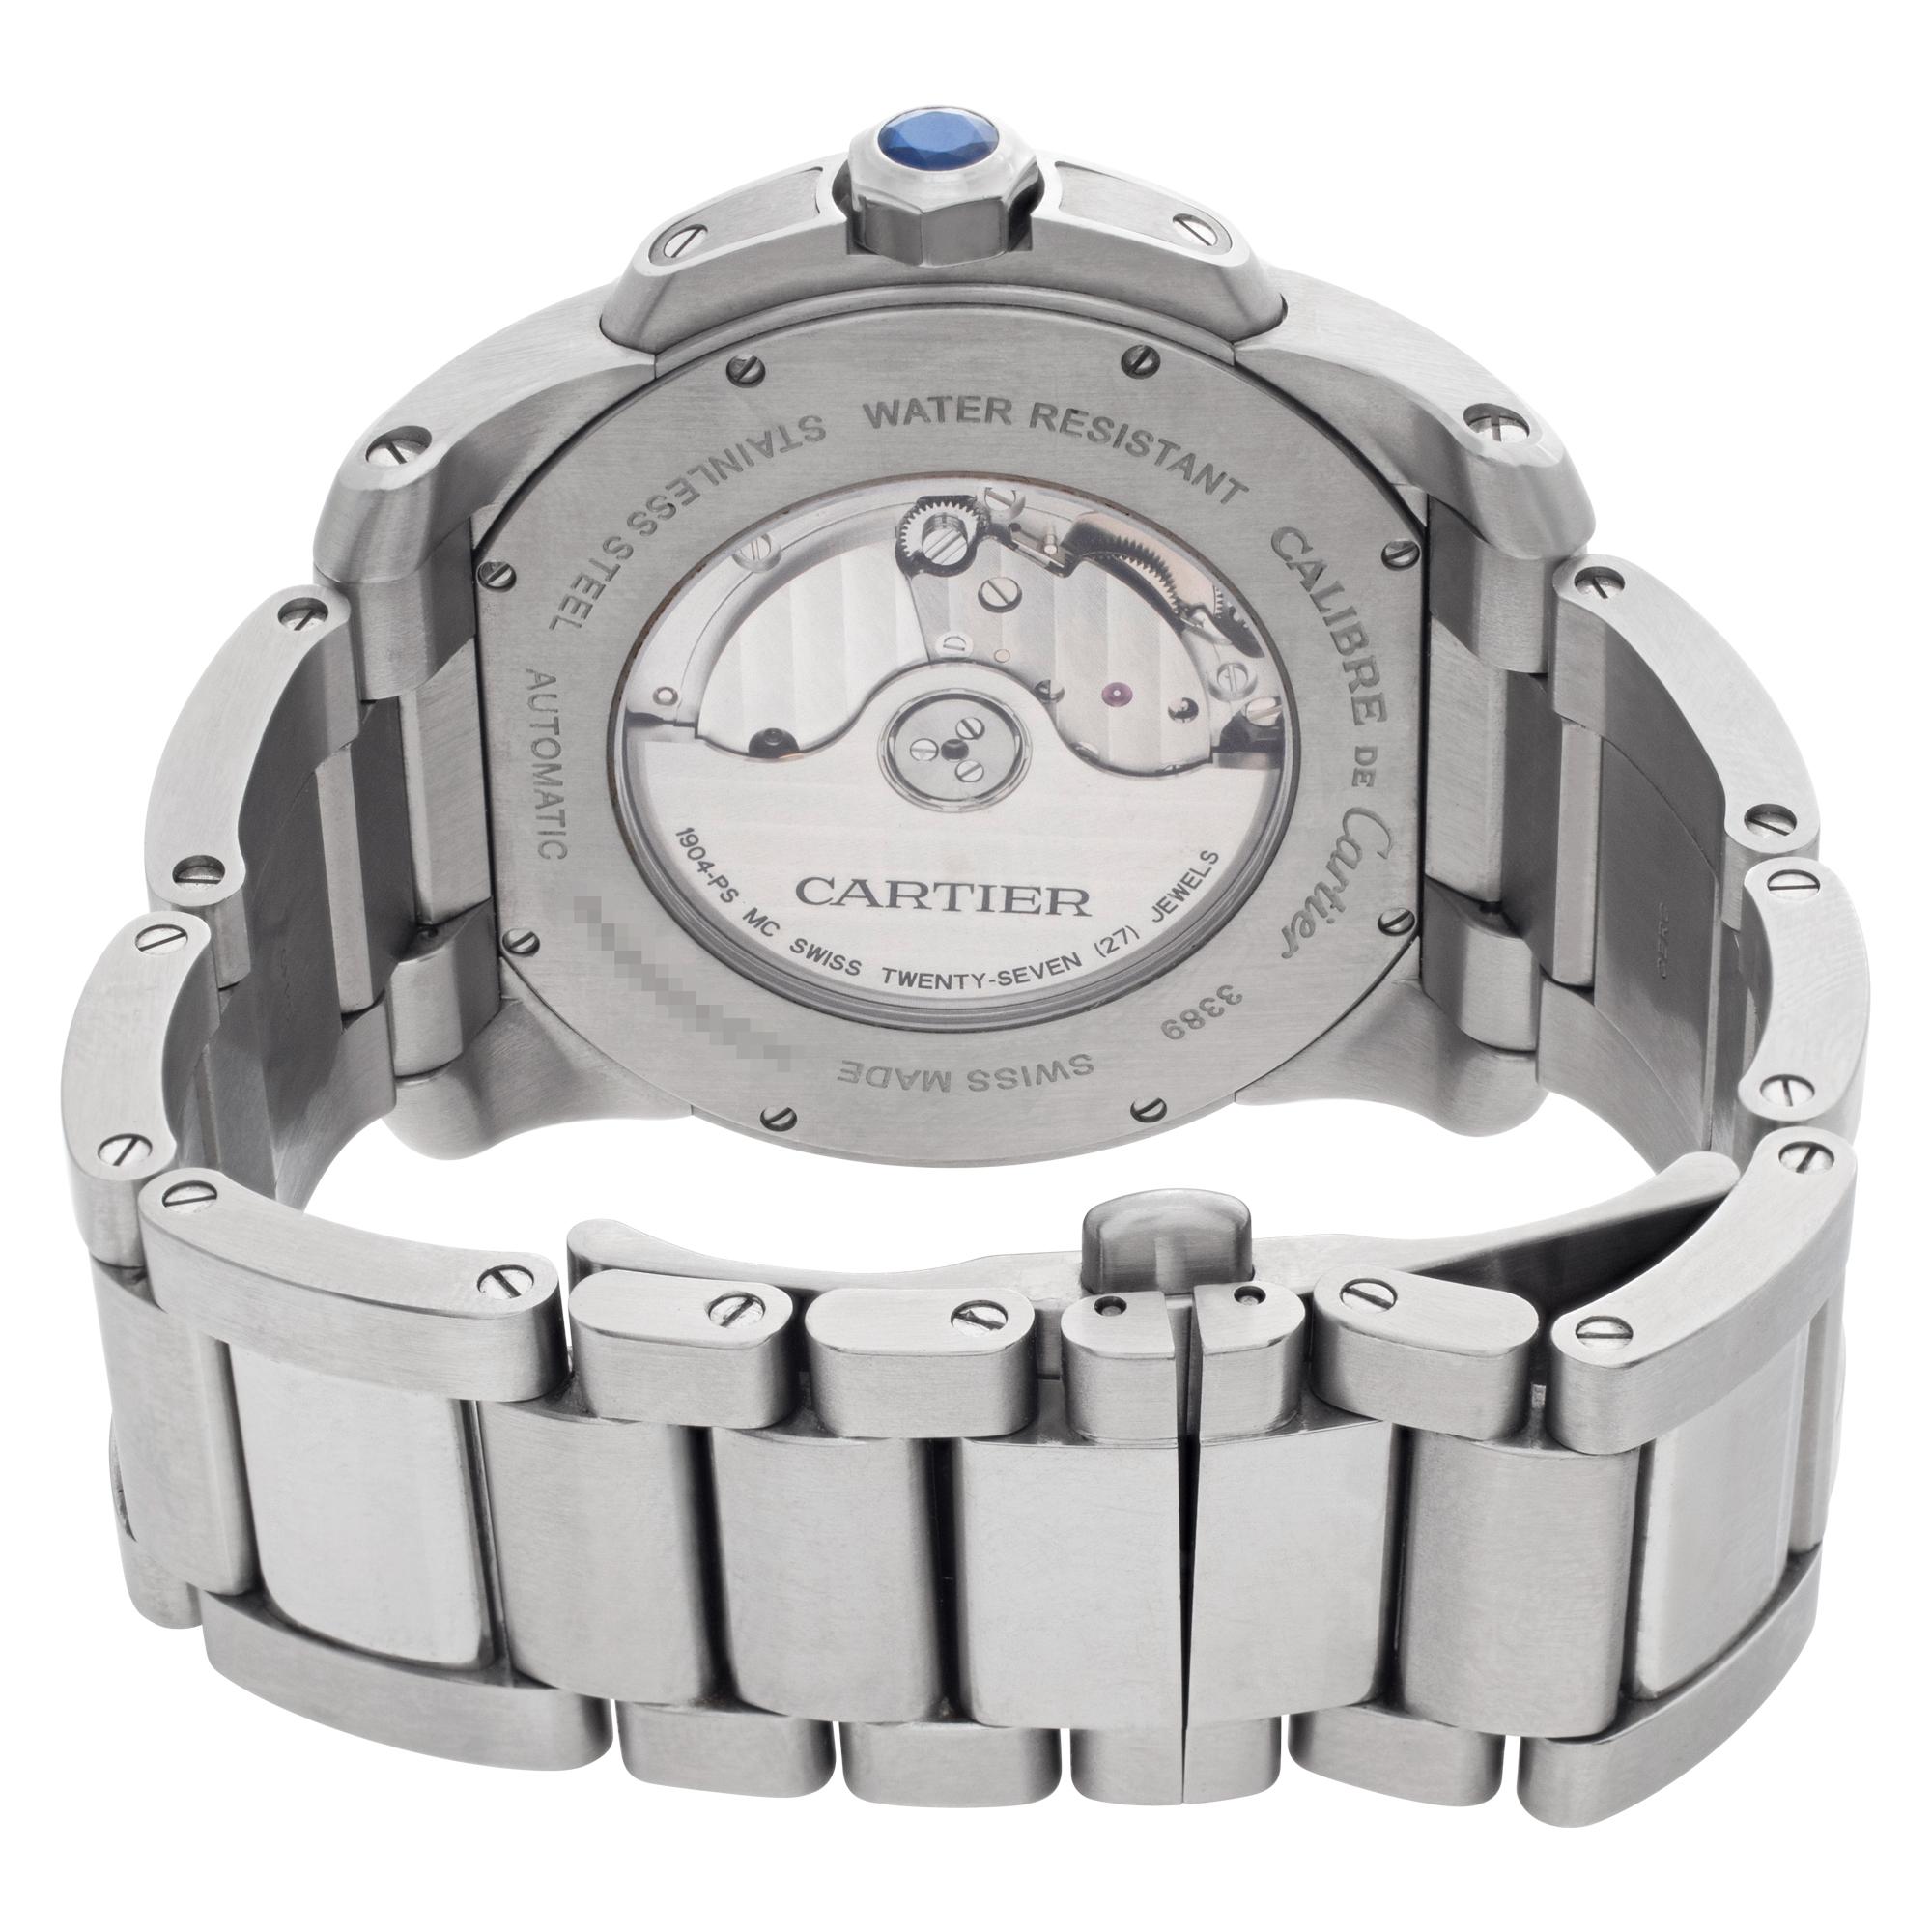 Cartier Calibre Stainless Steel Black Dial Ref. W7100016, Automatic Watch For Sale 1